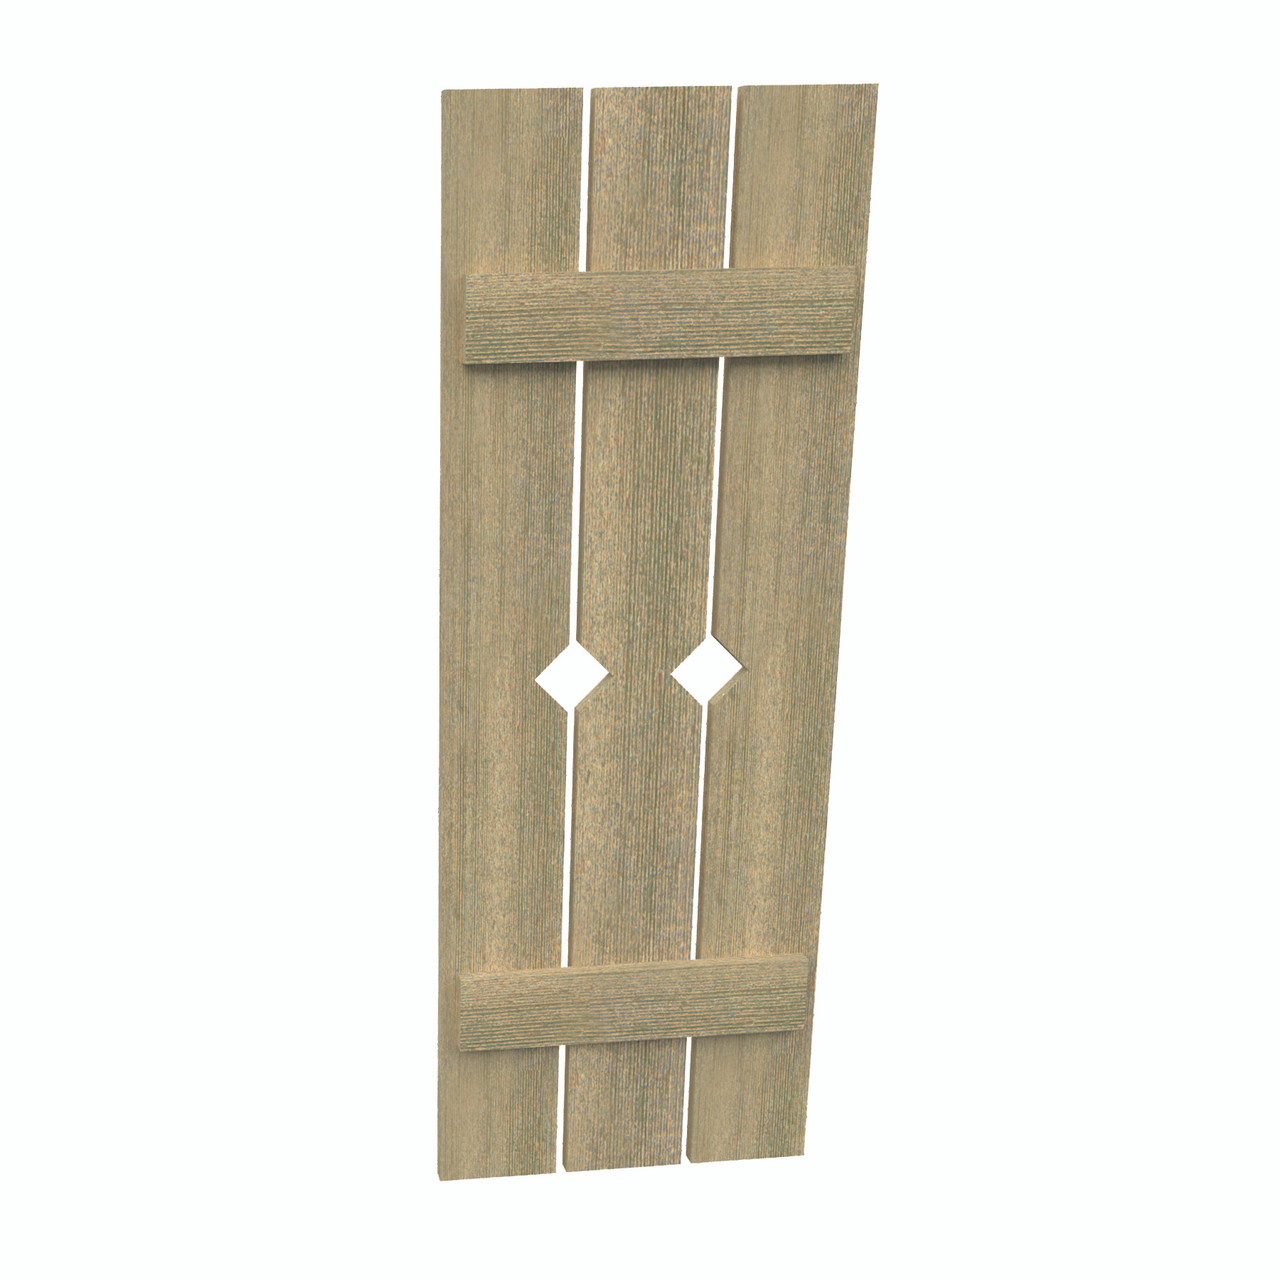 18 inch by 41 inch Plank Shutter with 3-Plank, Diamond